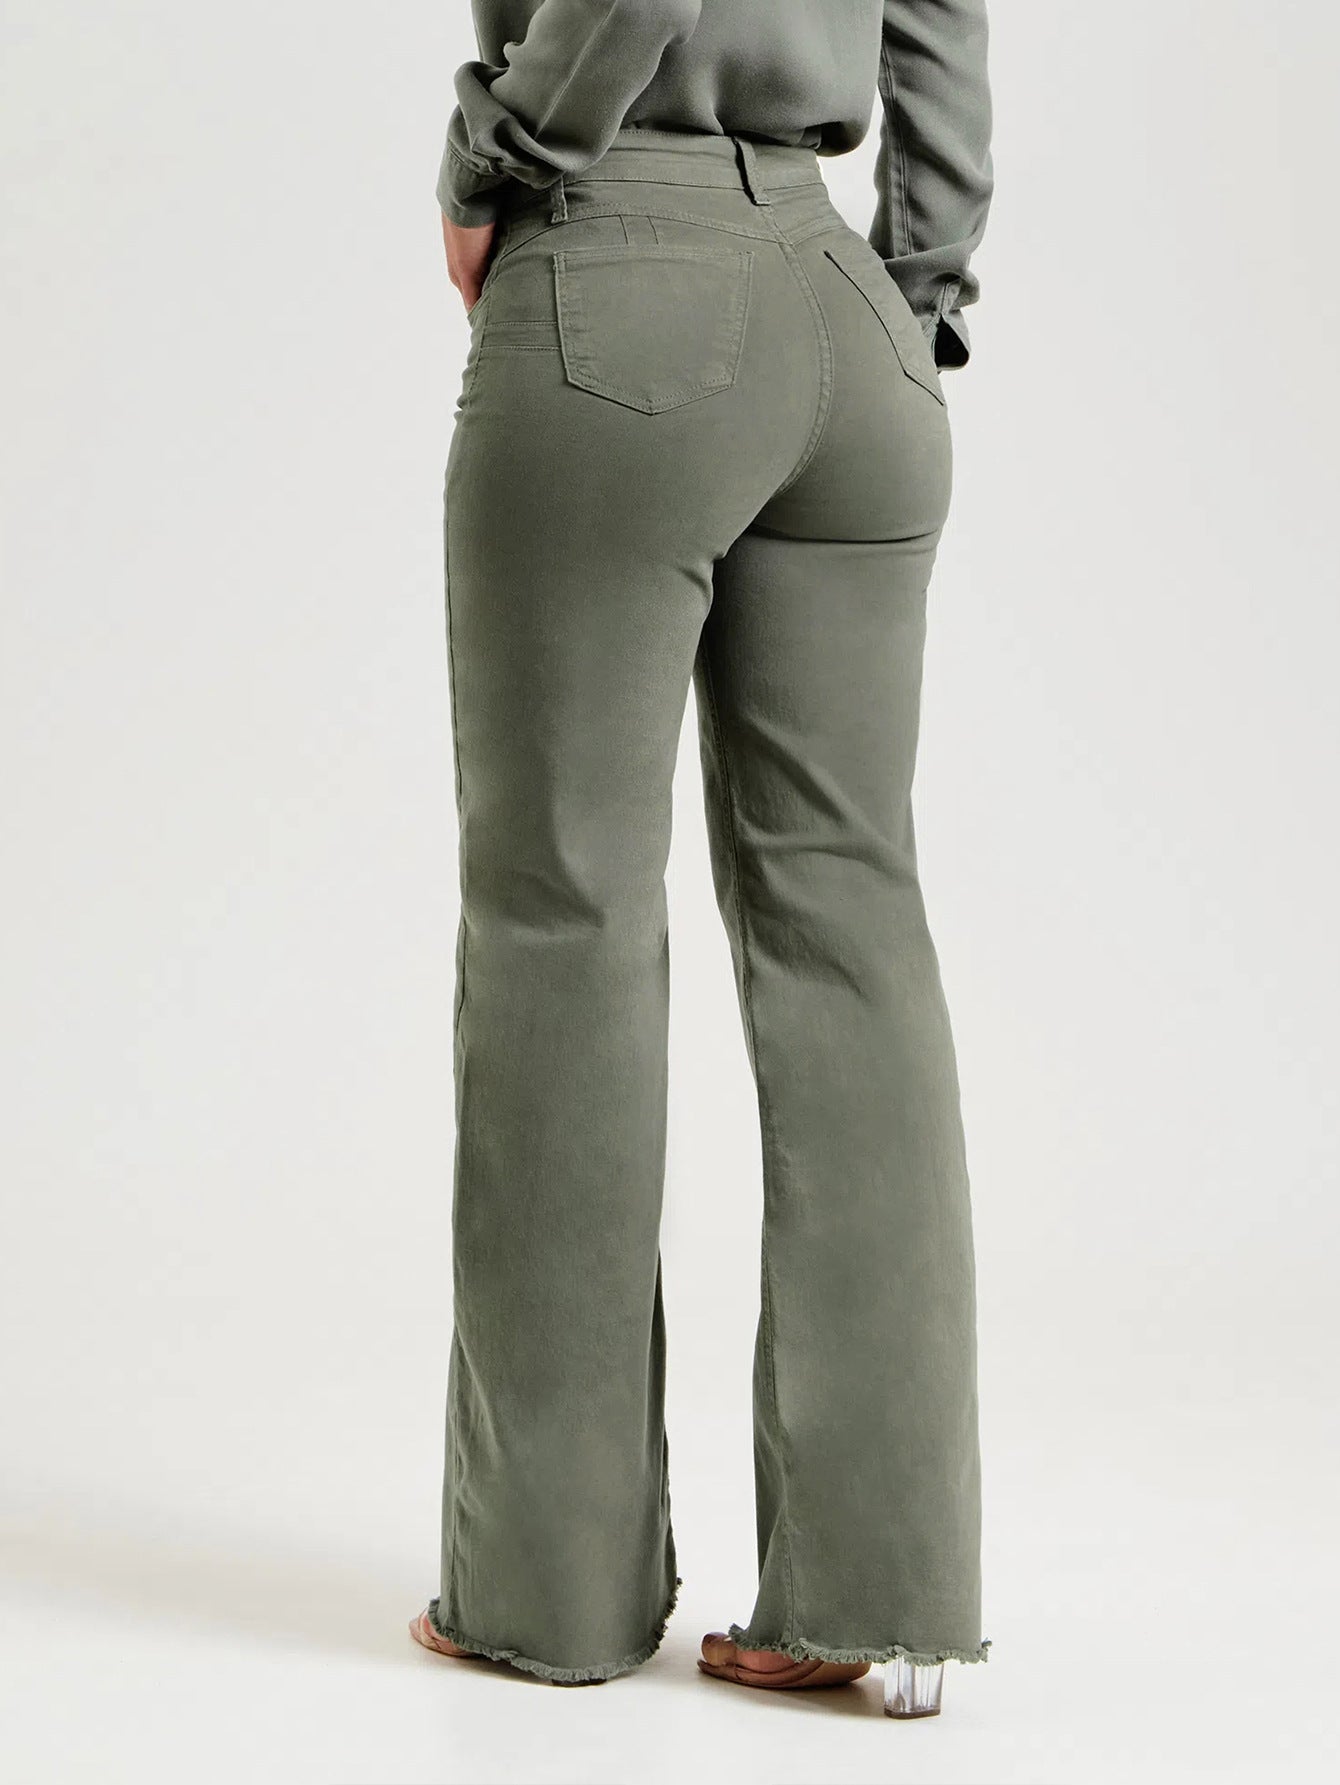 Women's Olive Green Frayed Edge Flare Jeans